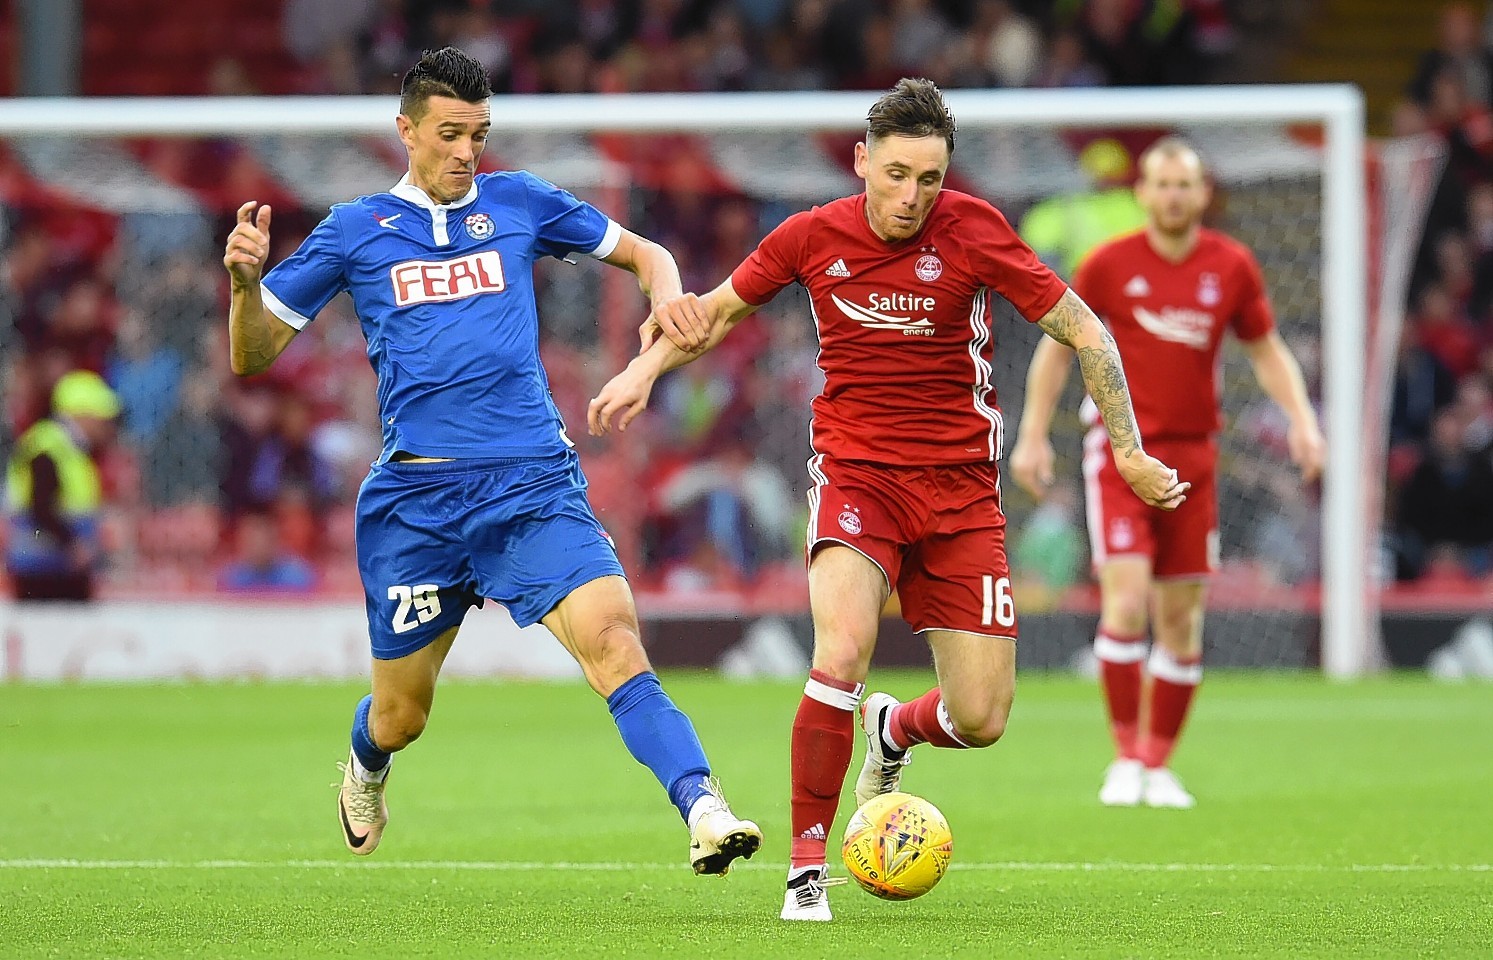 Aberdeen's Greg Tansey (R) in action